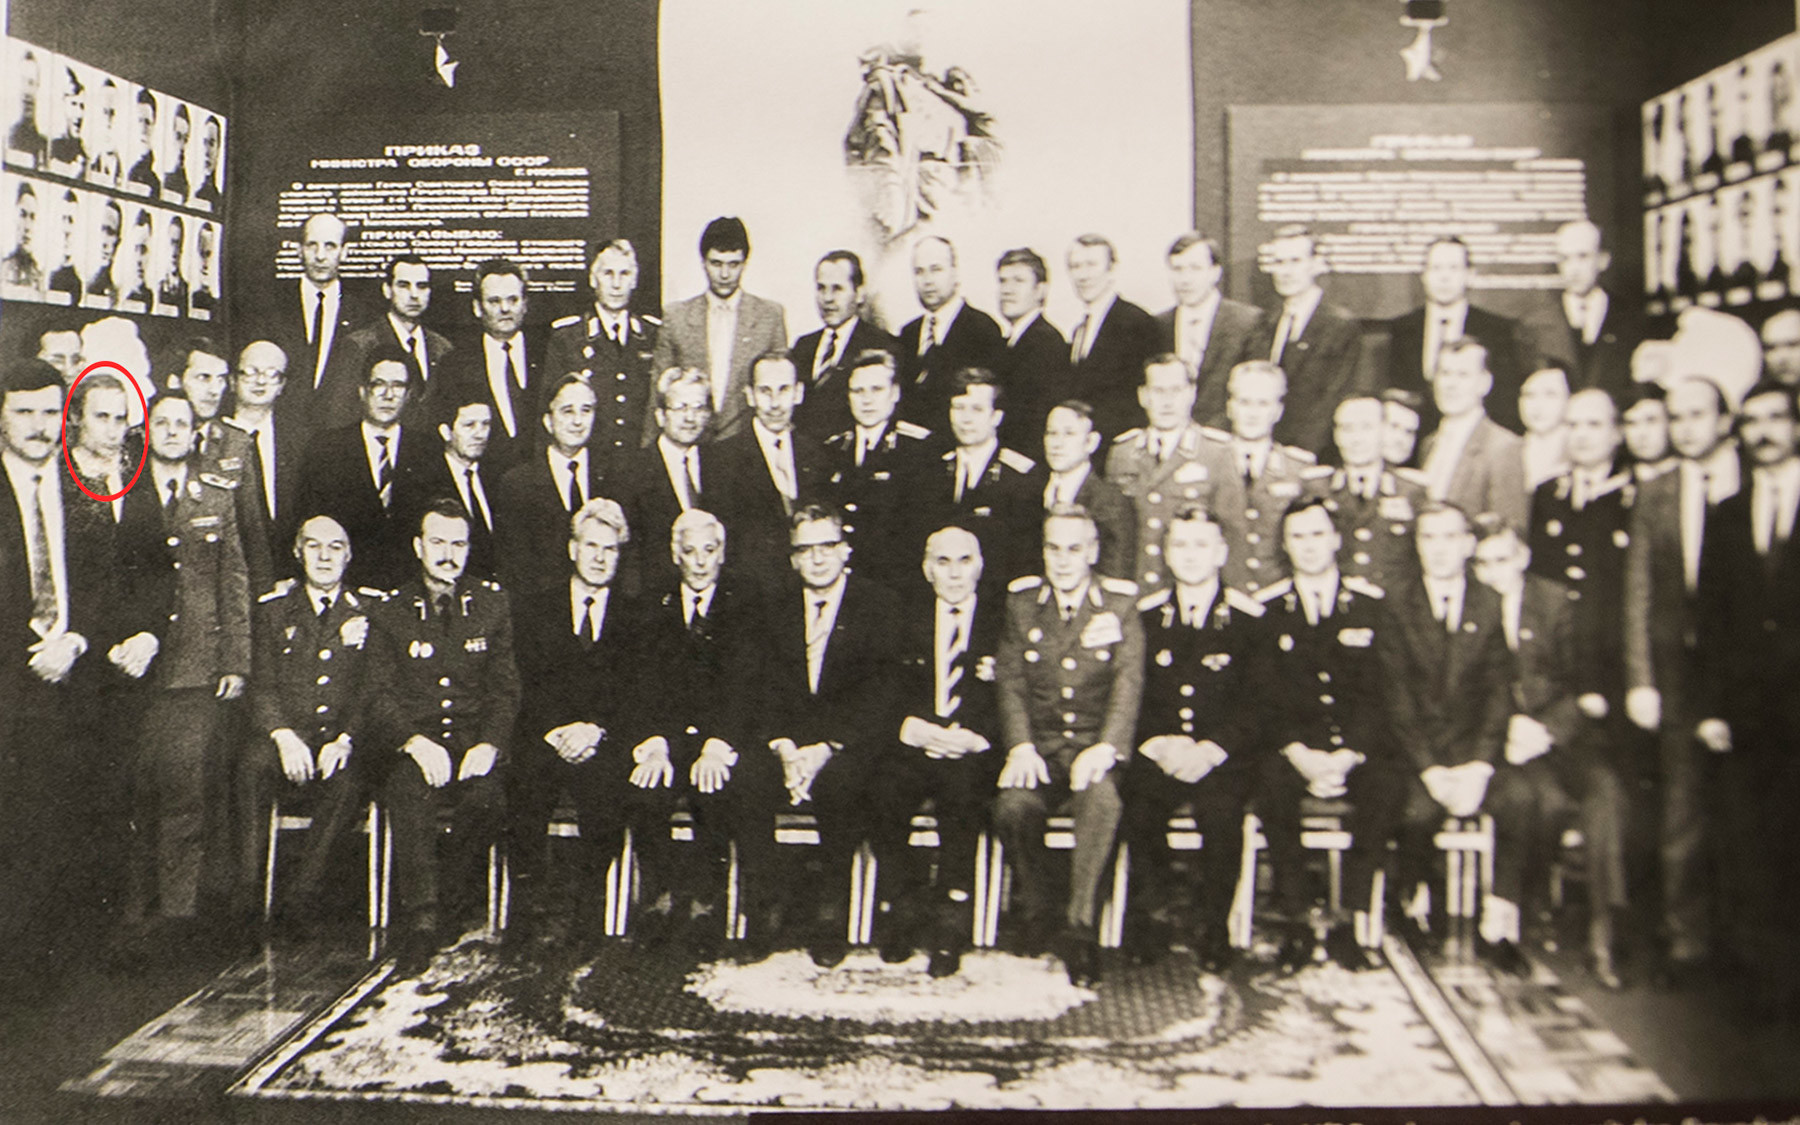 This picture shows a photo of Vladimir Putin as he stands in a group of senior Soviet and East German military and security officers at the regional office of the Stasi in Dresden.